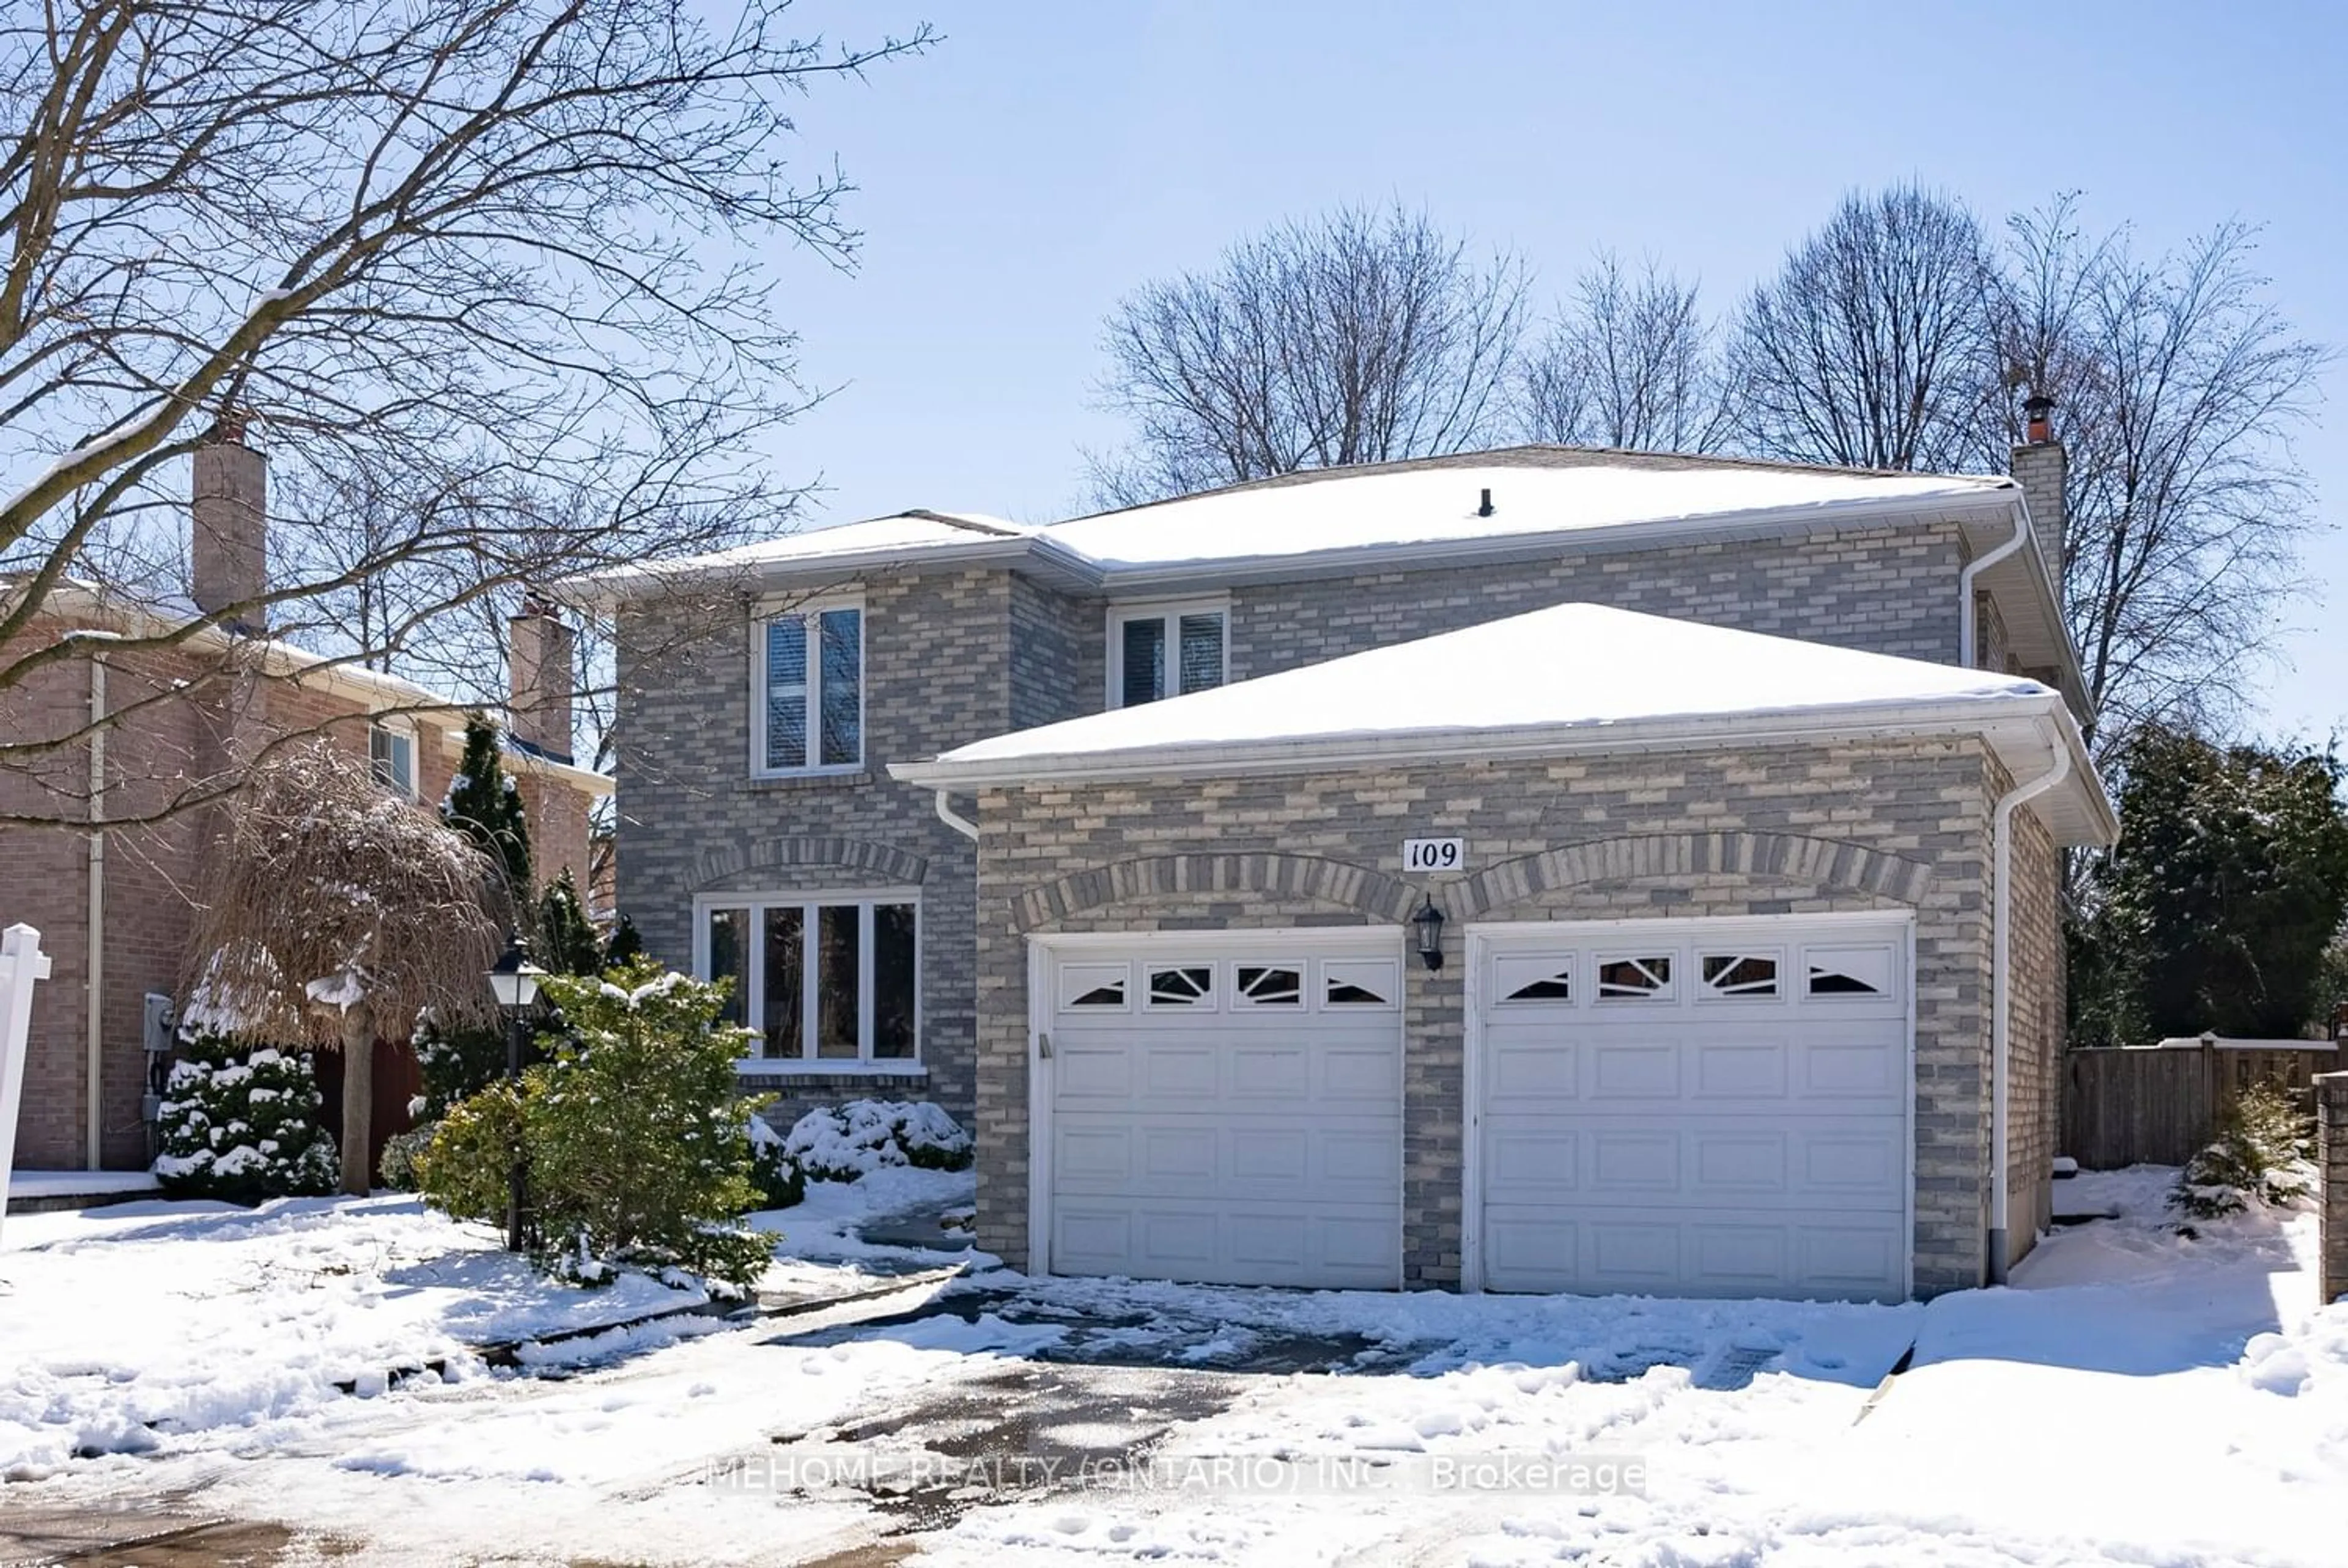 Home with stone exterior material for 109 Fincham Ave, Markham Ontario L3P 4E3